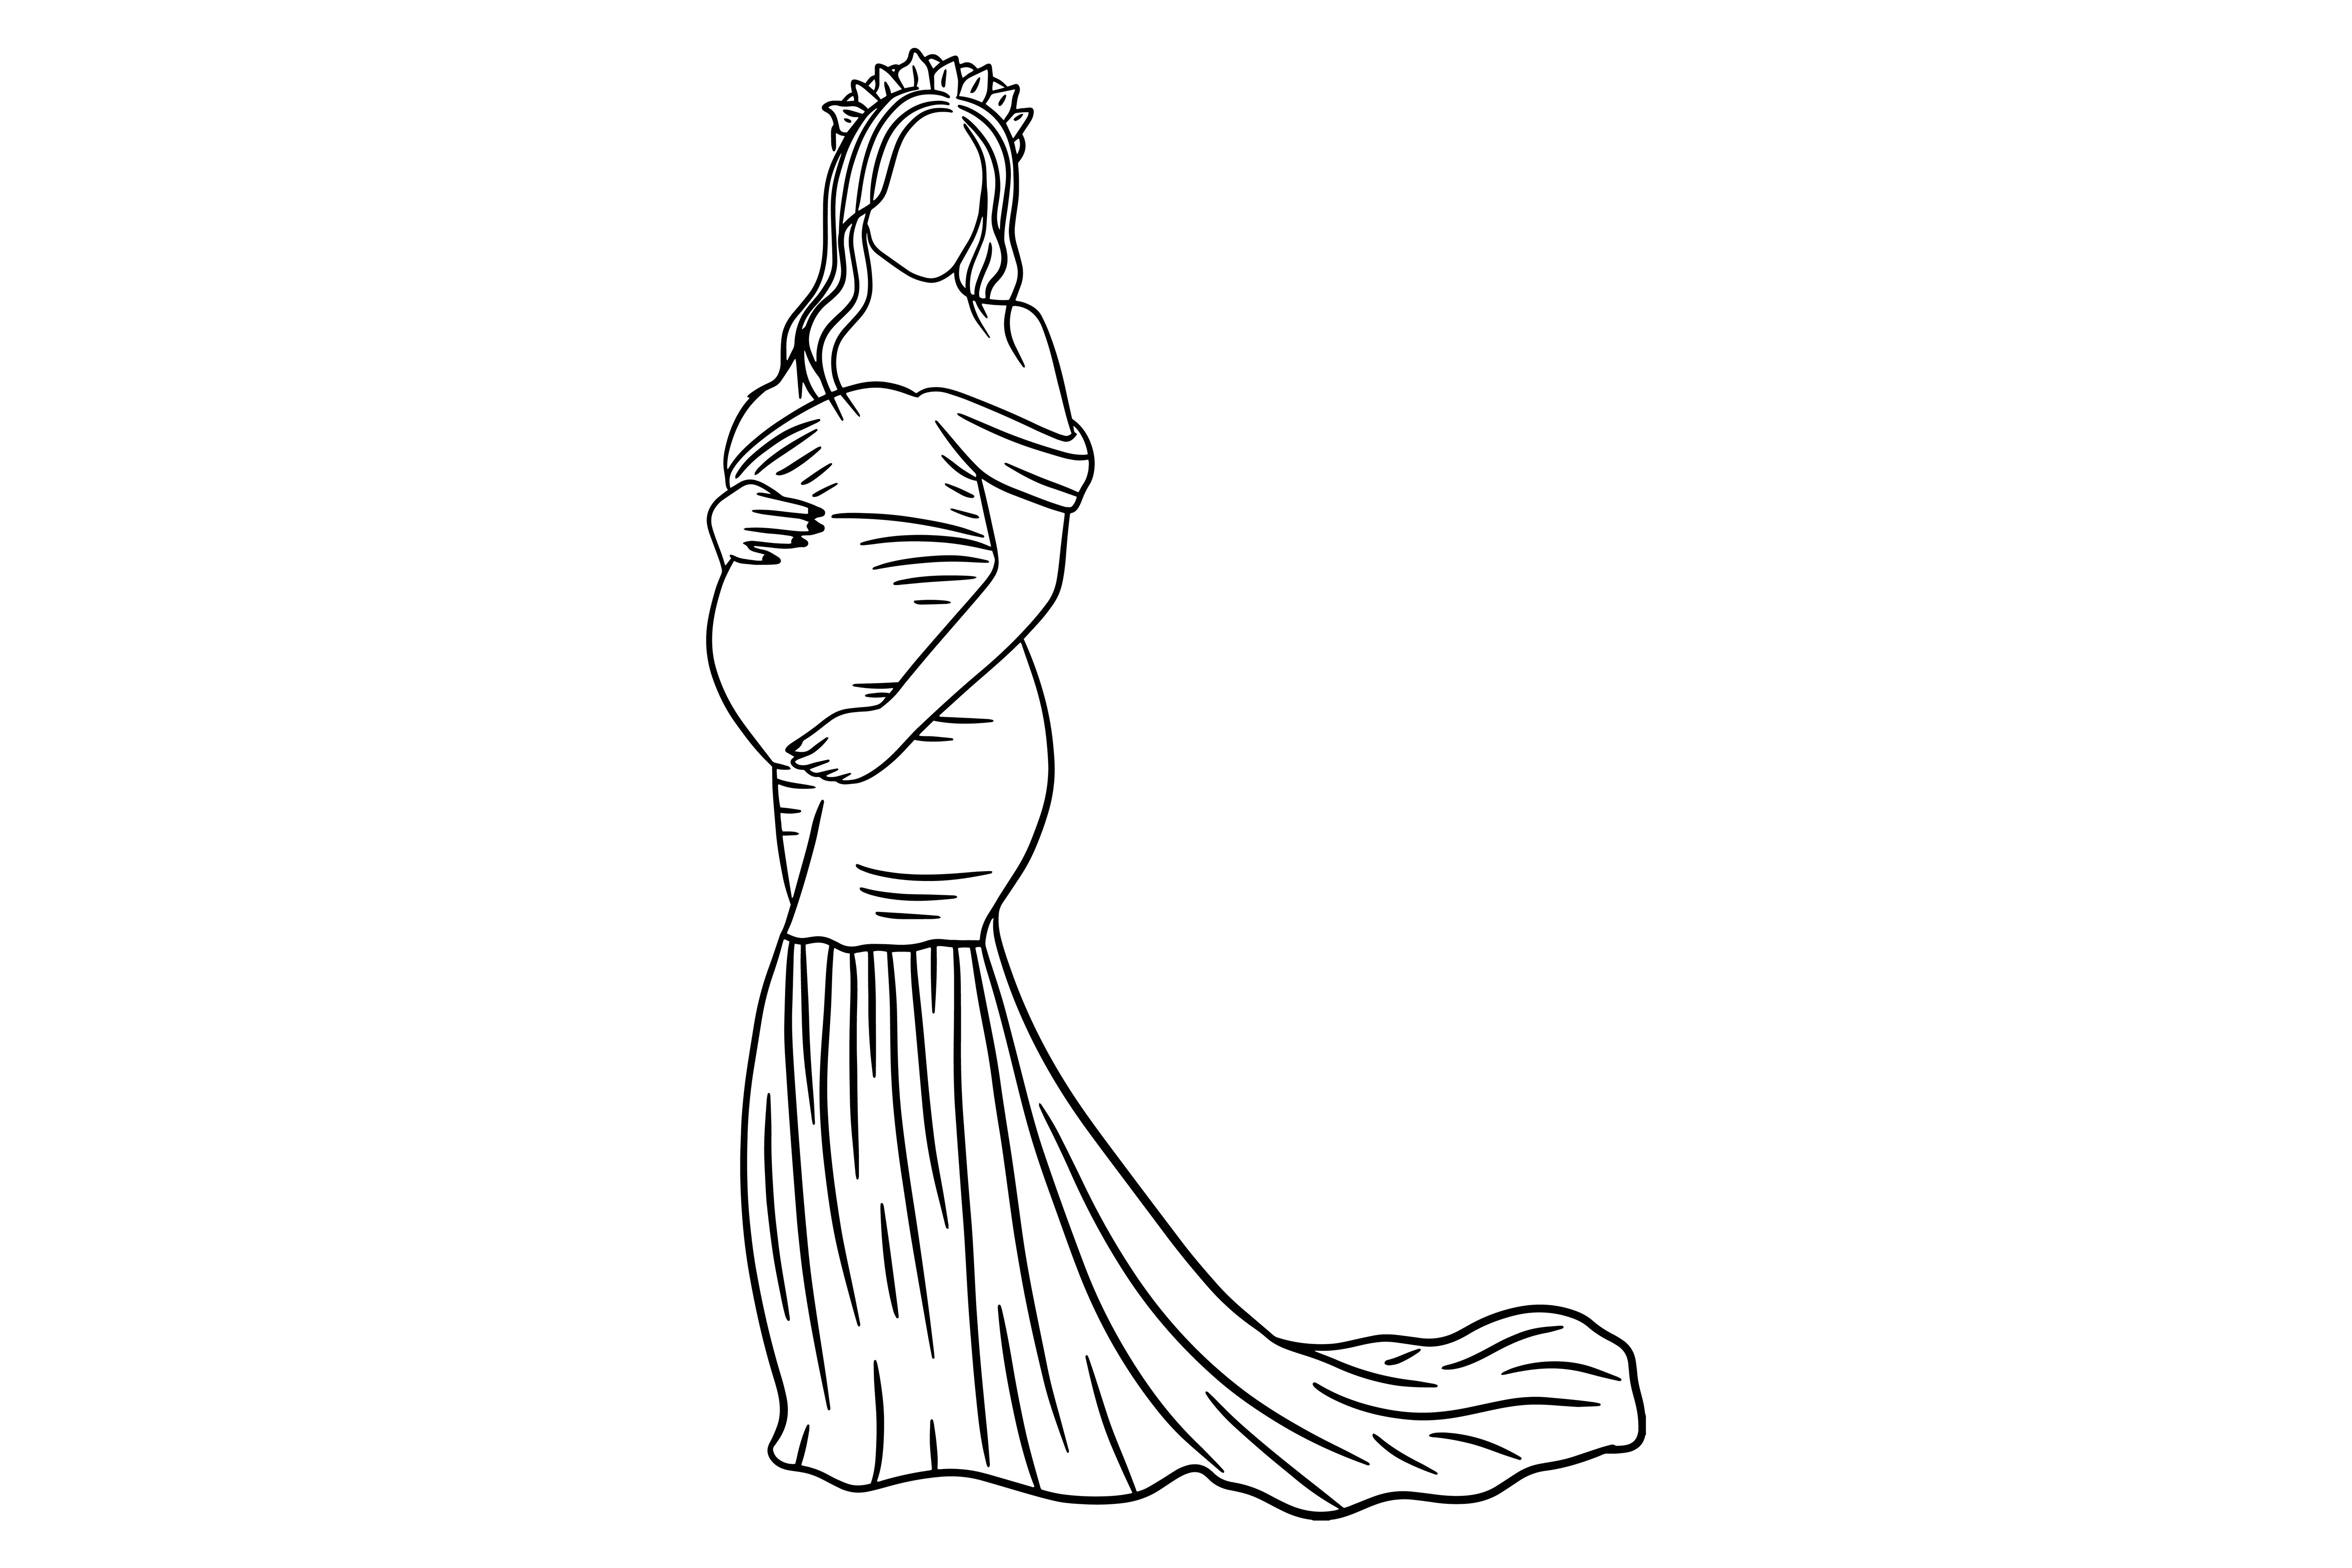 Happy Maternity Pose Pregnant Line Art Graphic by morspective